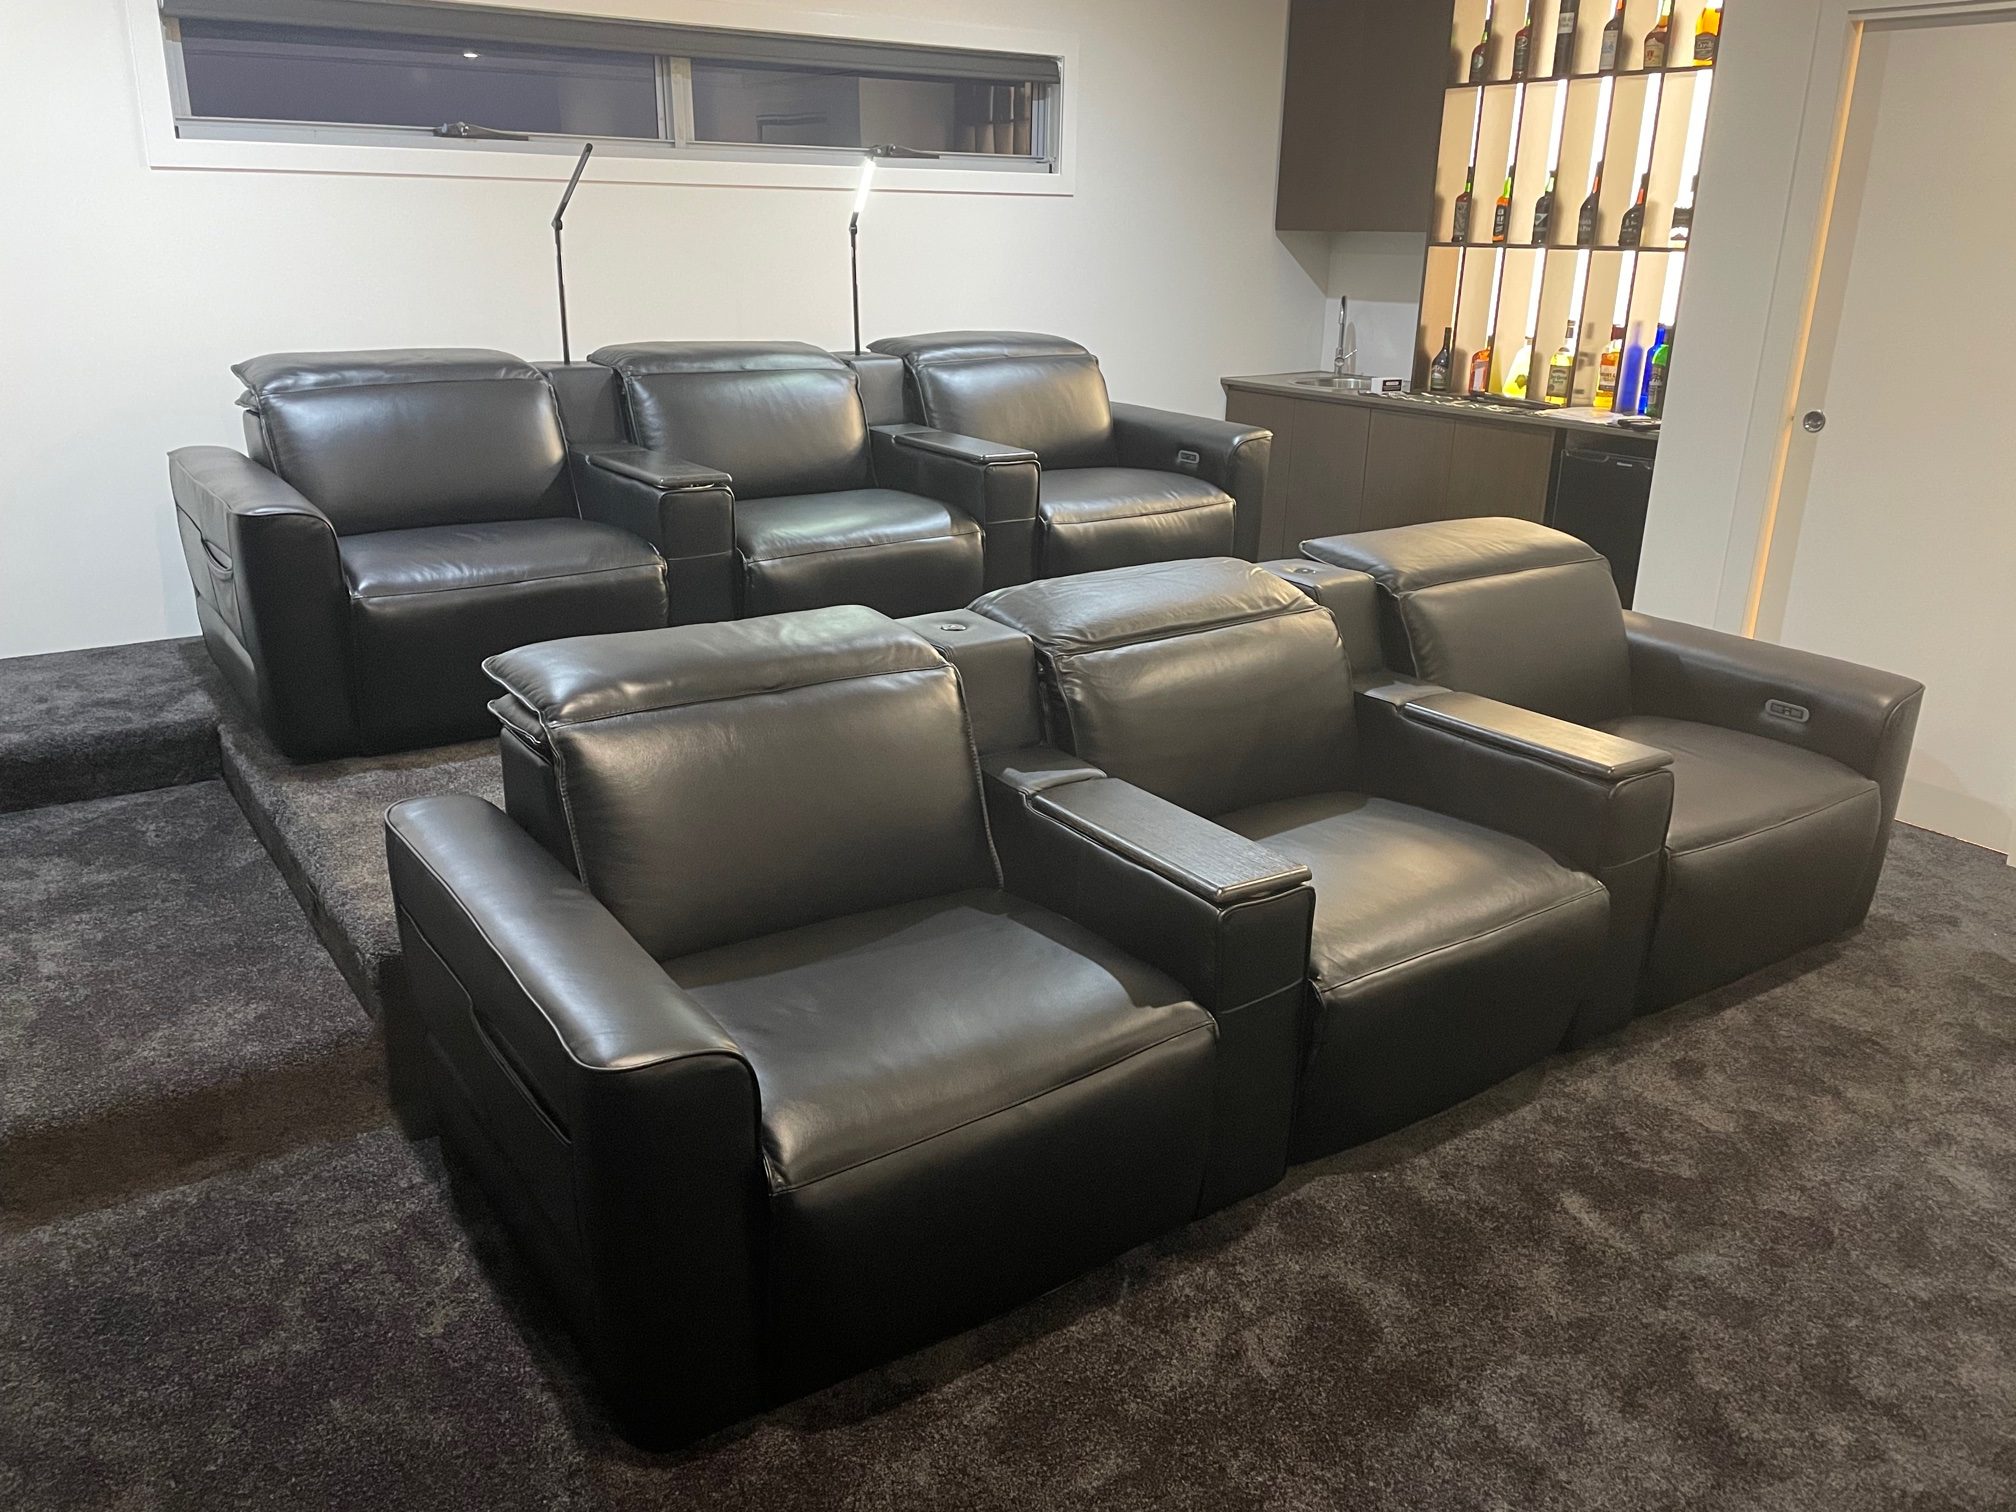 Home Theatre Seating